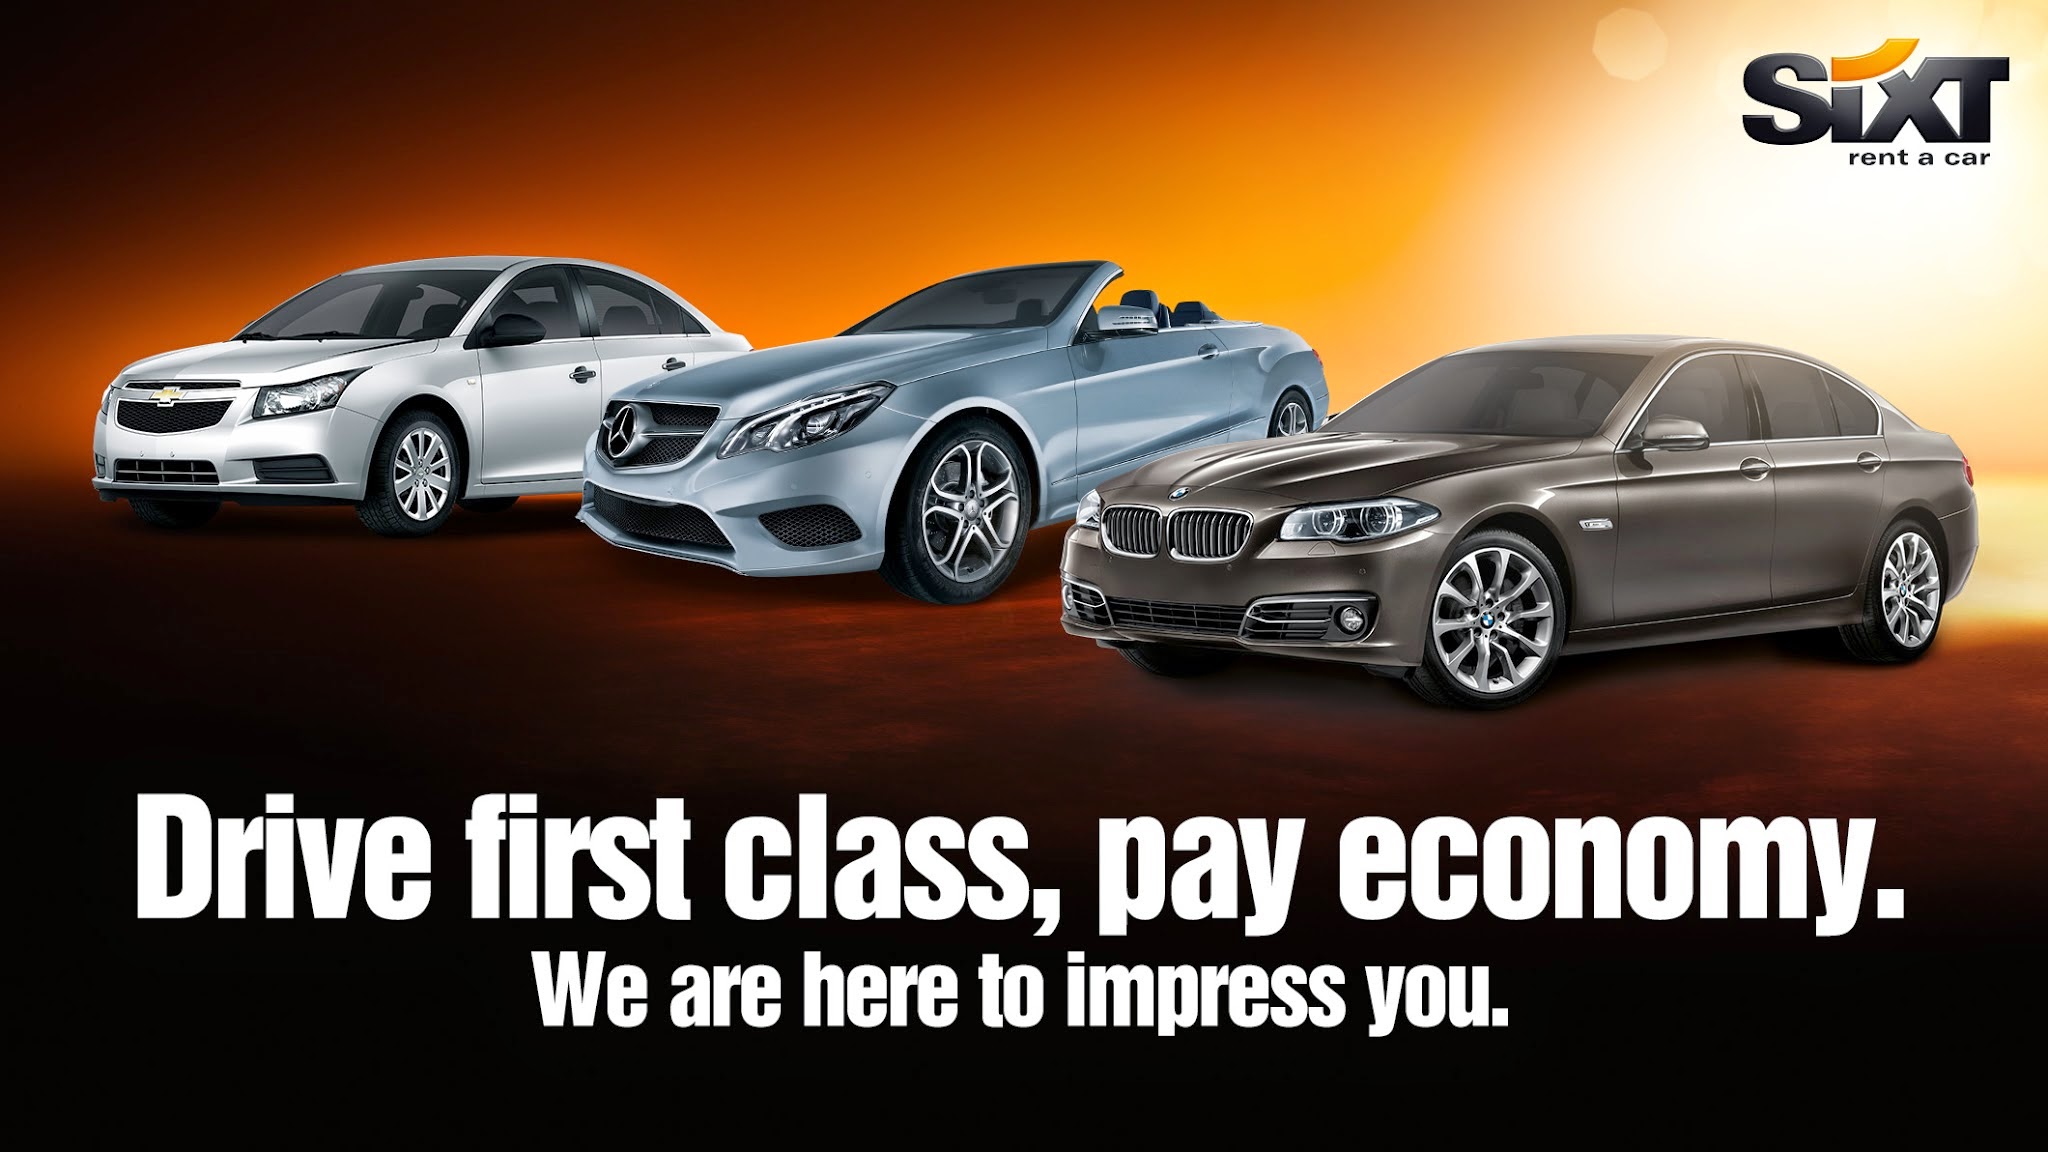 Travelling Is No Longer A Hassle With Sixt Rent Car